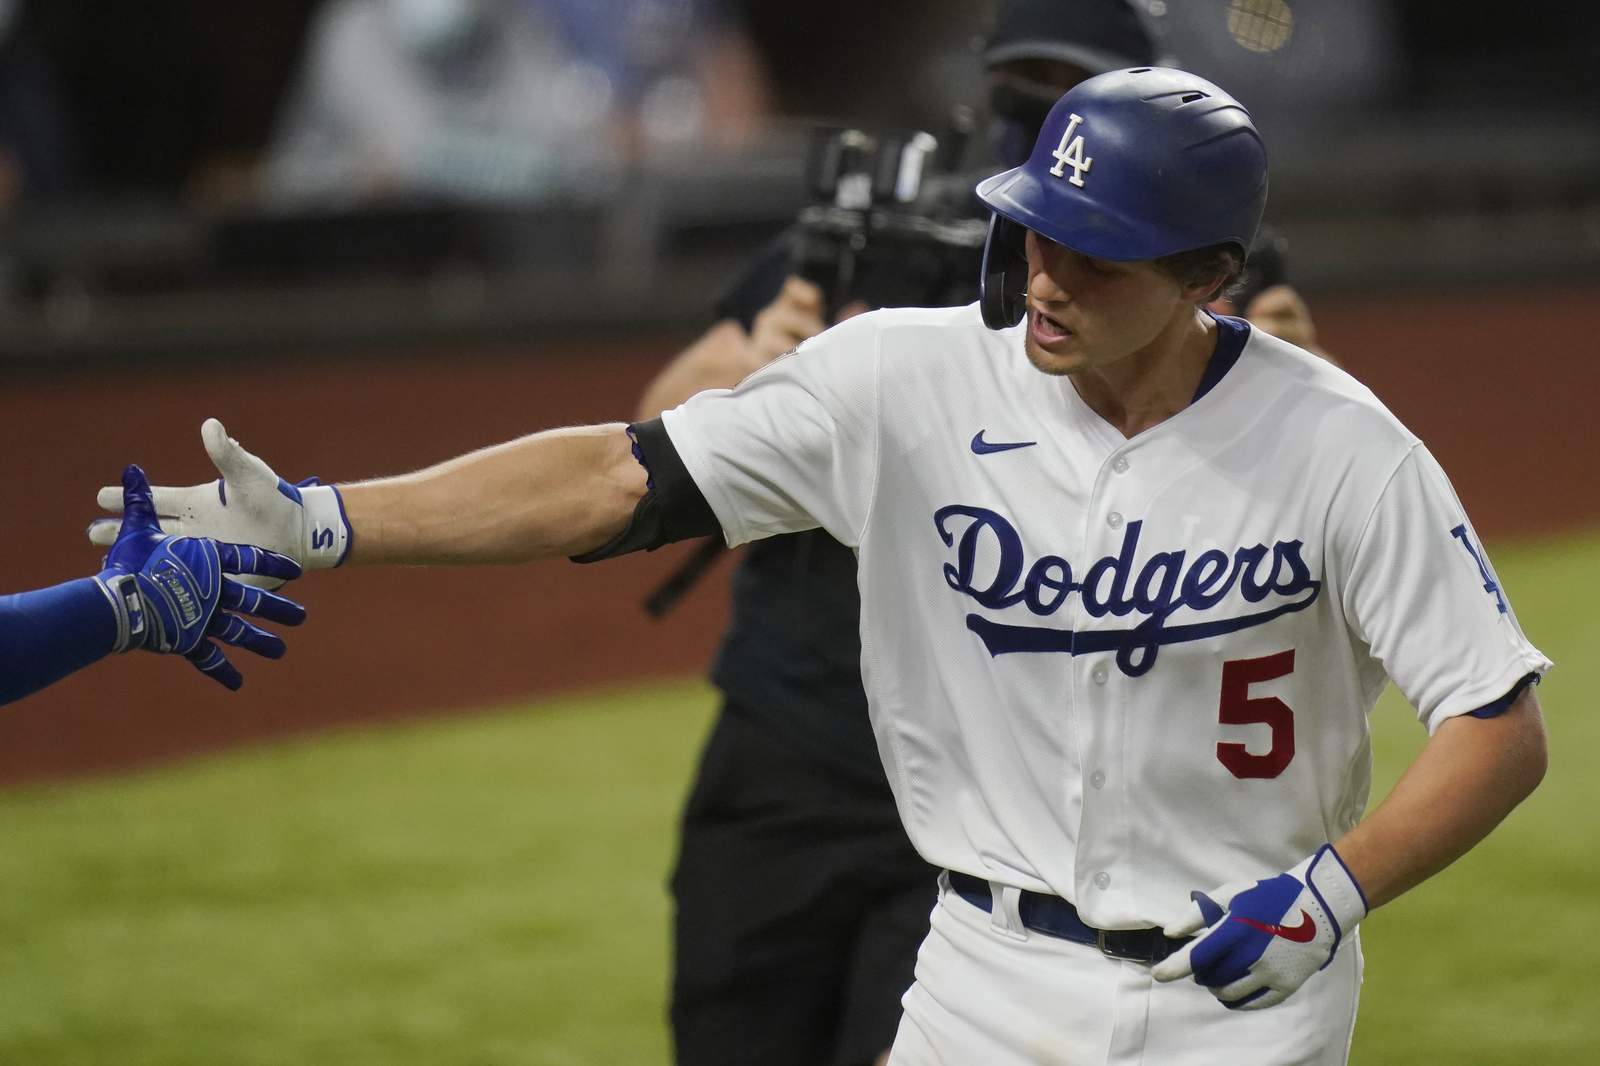 The Latest: Dodgers pull within 6-4 on Seager homer in 8th